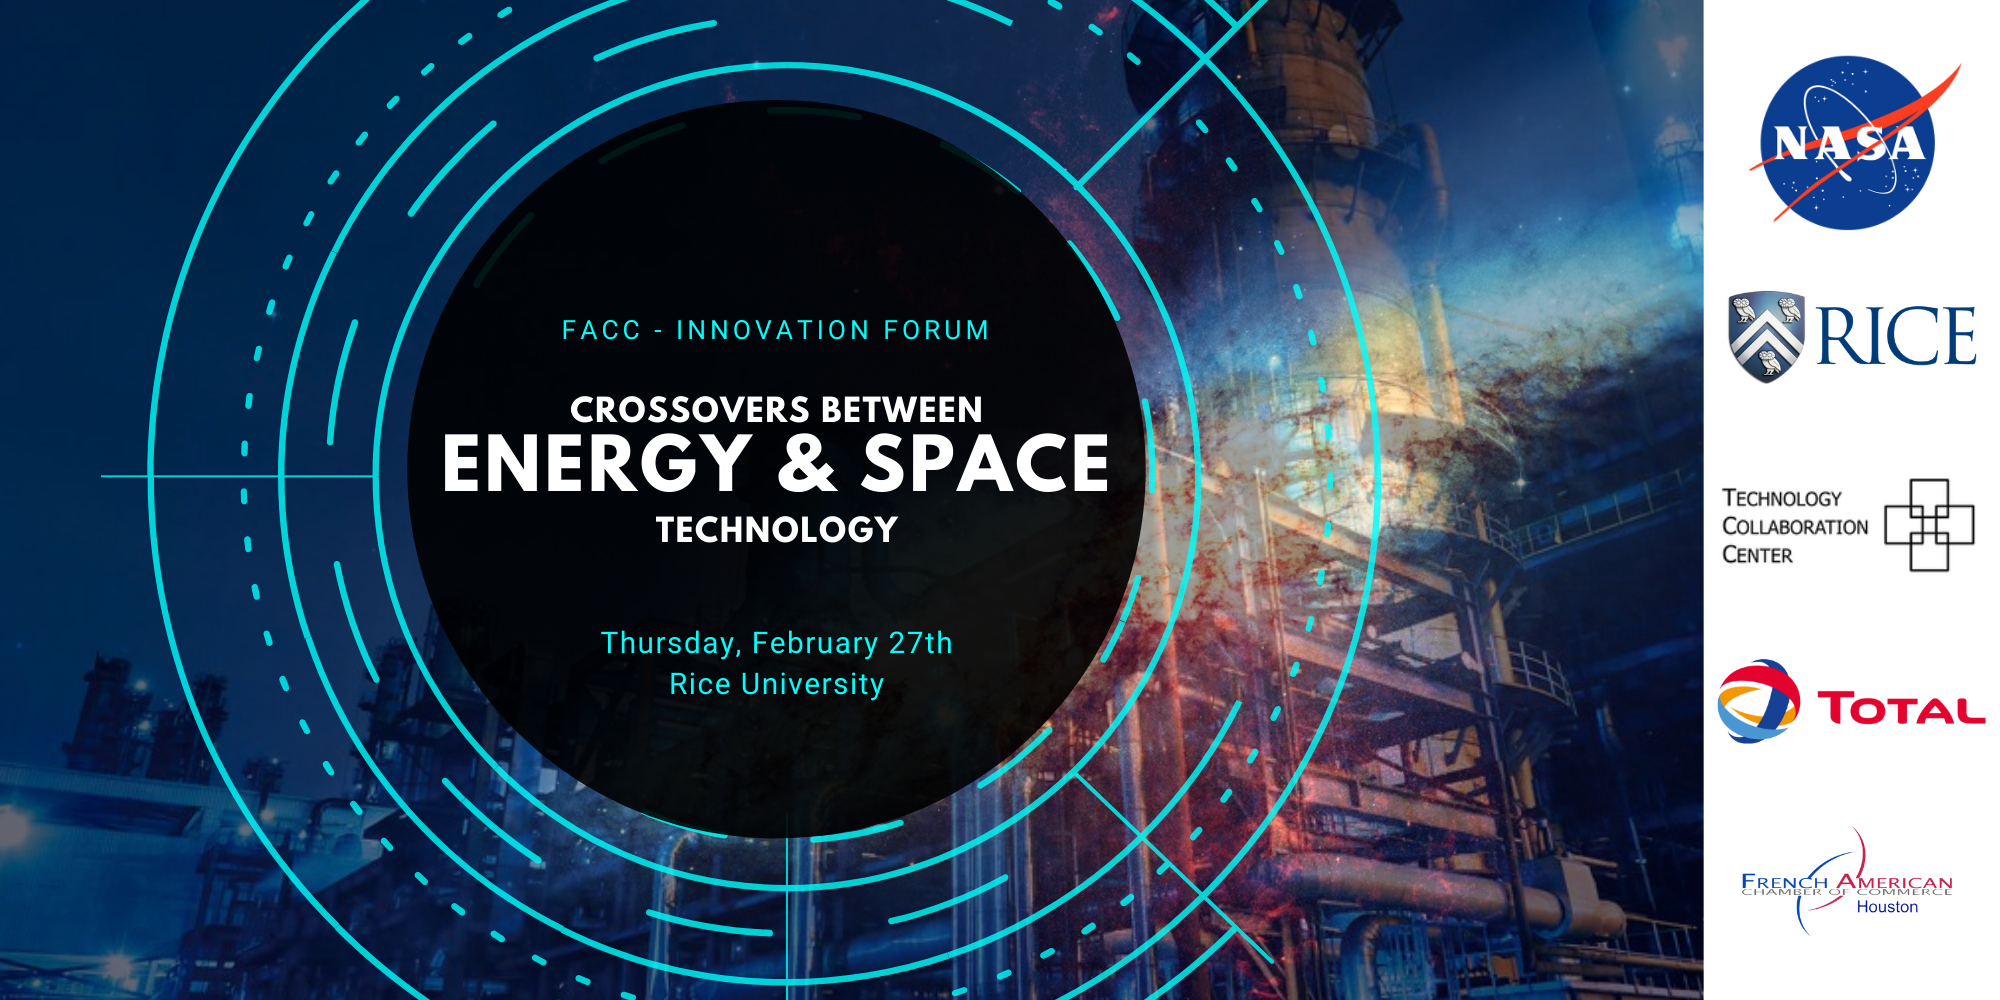 Crossovers between Energy and Space Technology